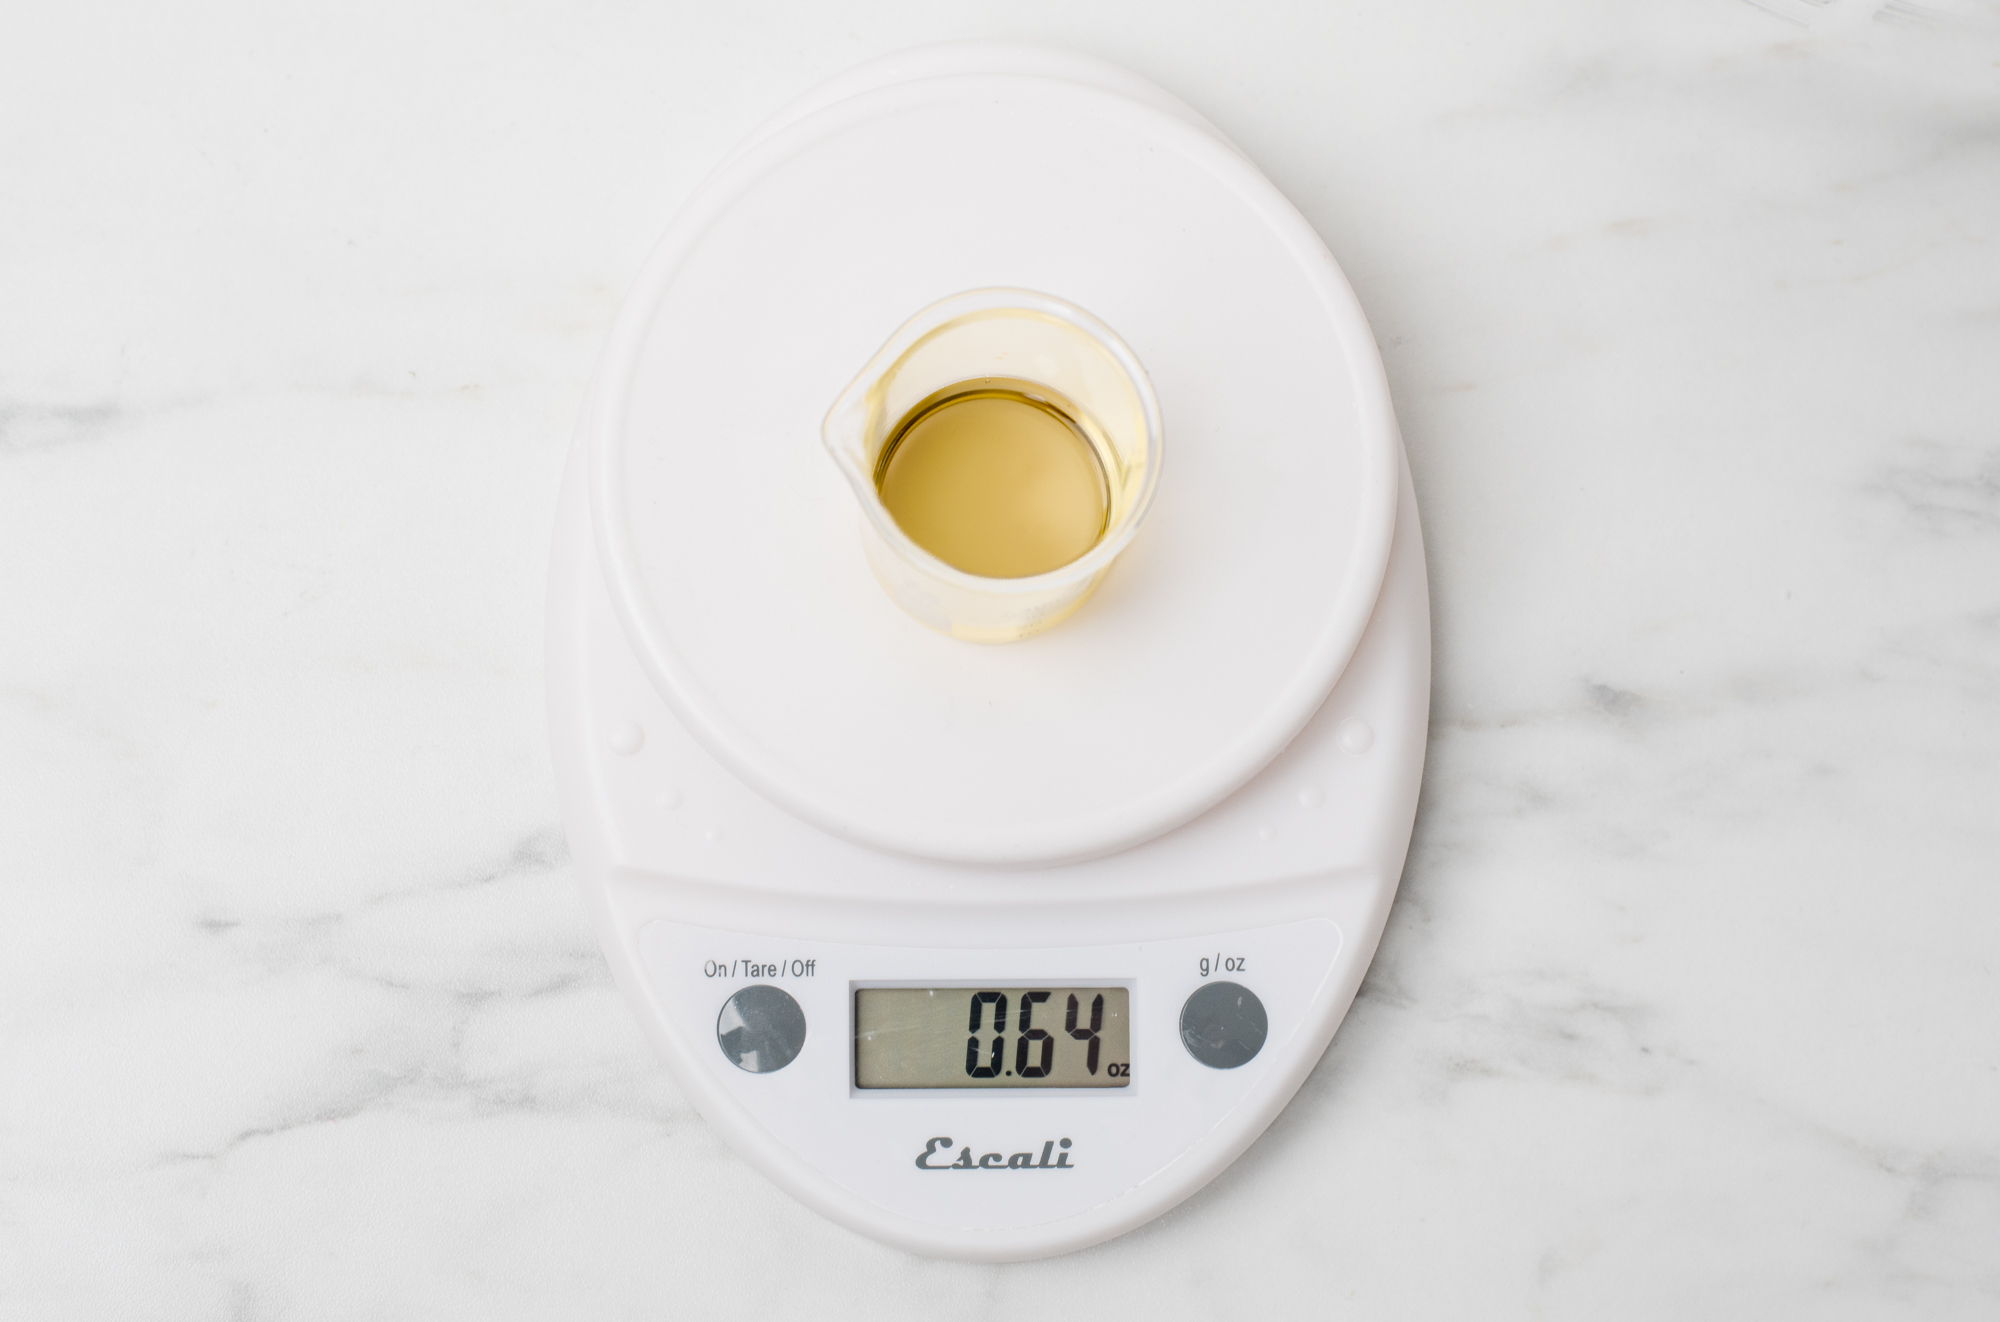 Weighing essential oil on a digital scale.